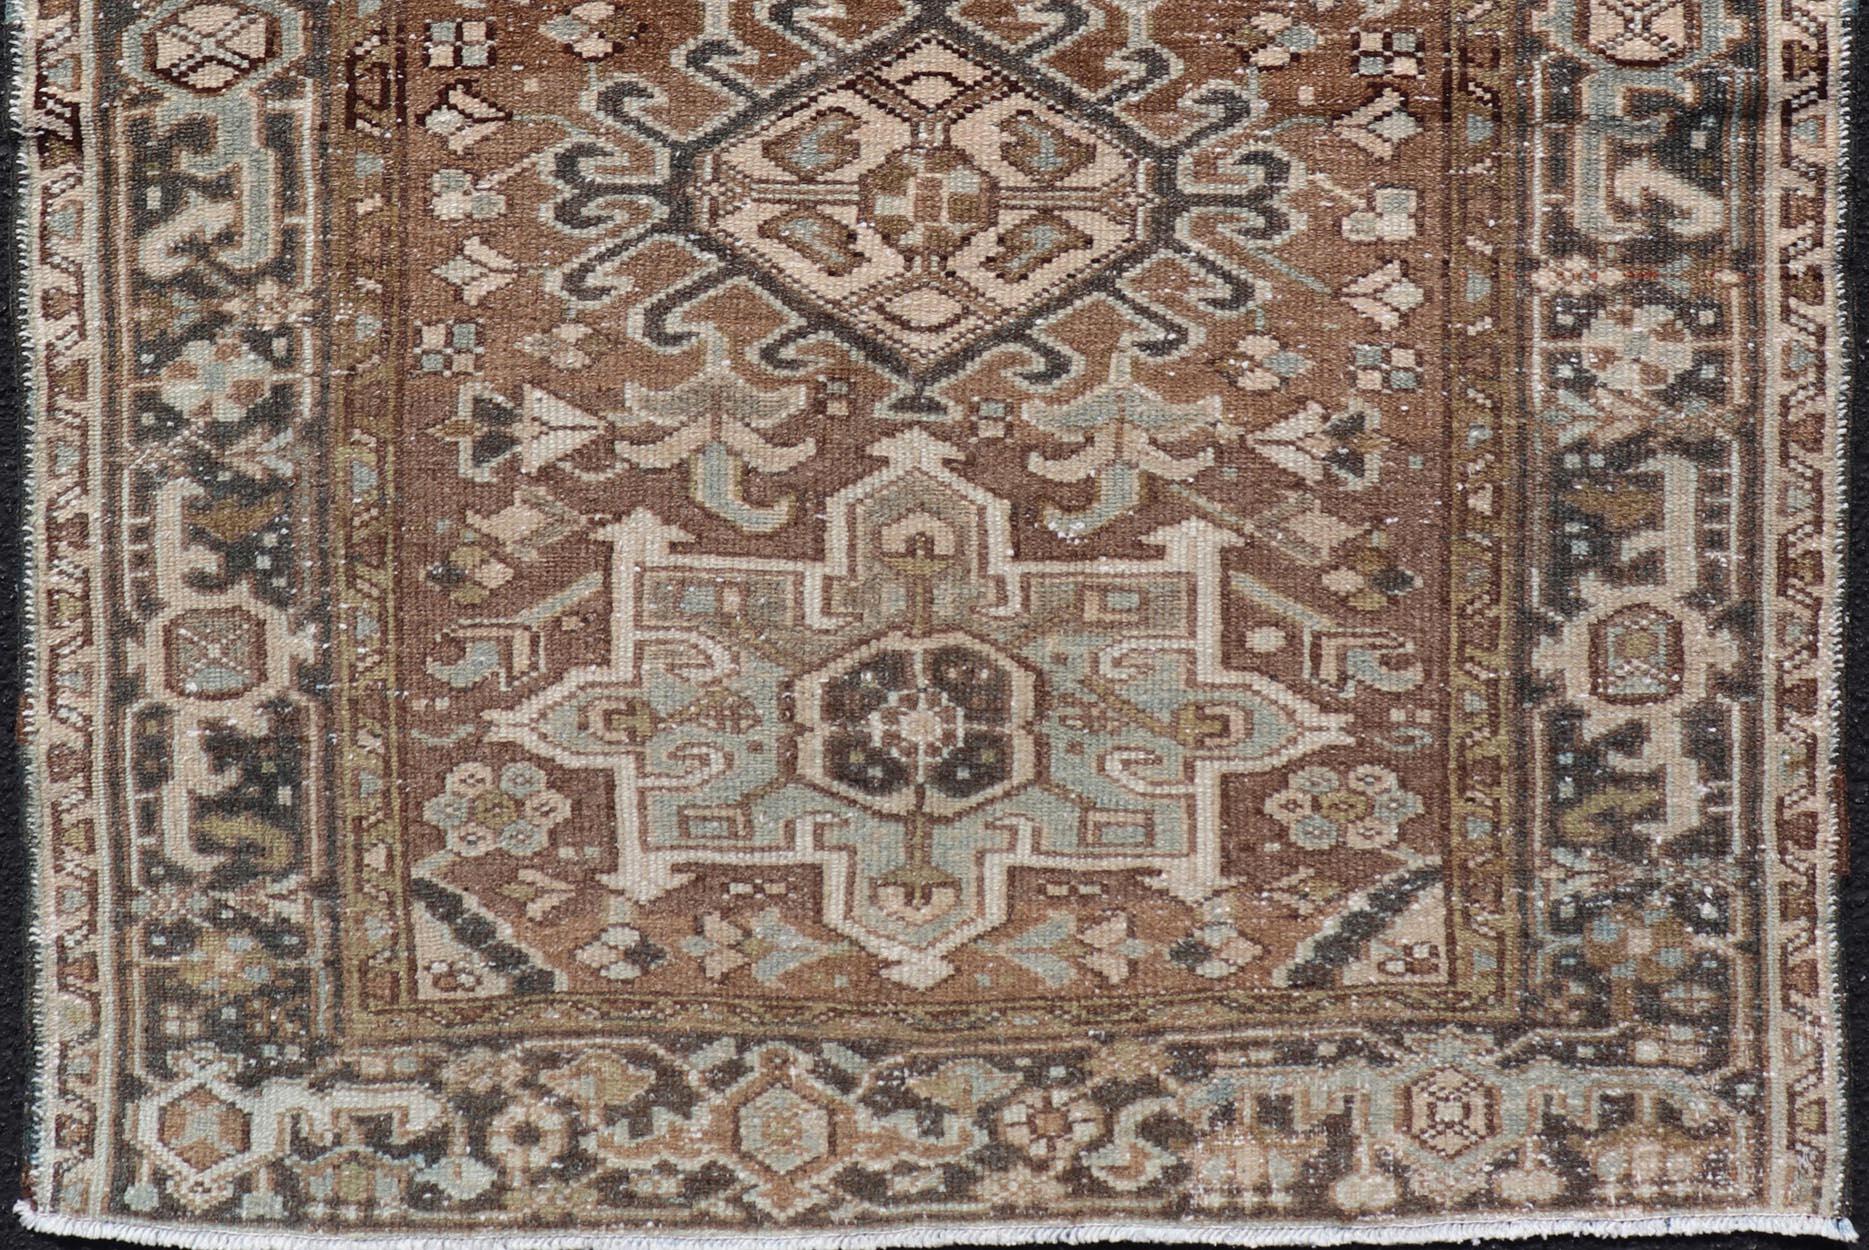 20th Century Antique Persian Heriz Rug with Geometric Medallion Design in Mocha, Blue, & Tan For Sale